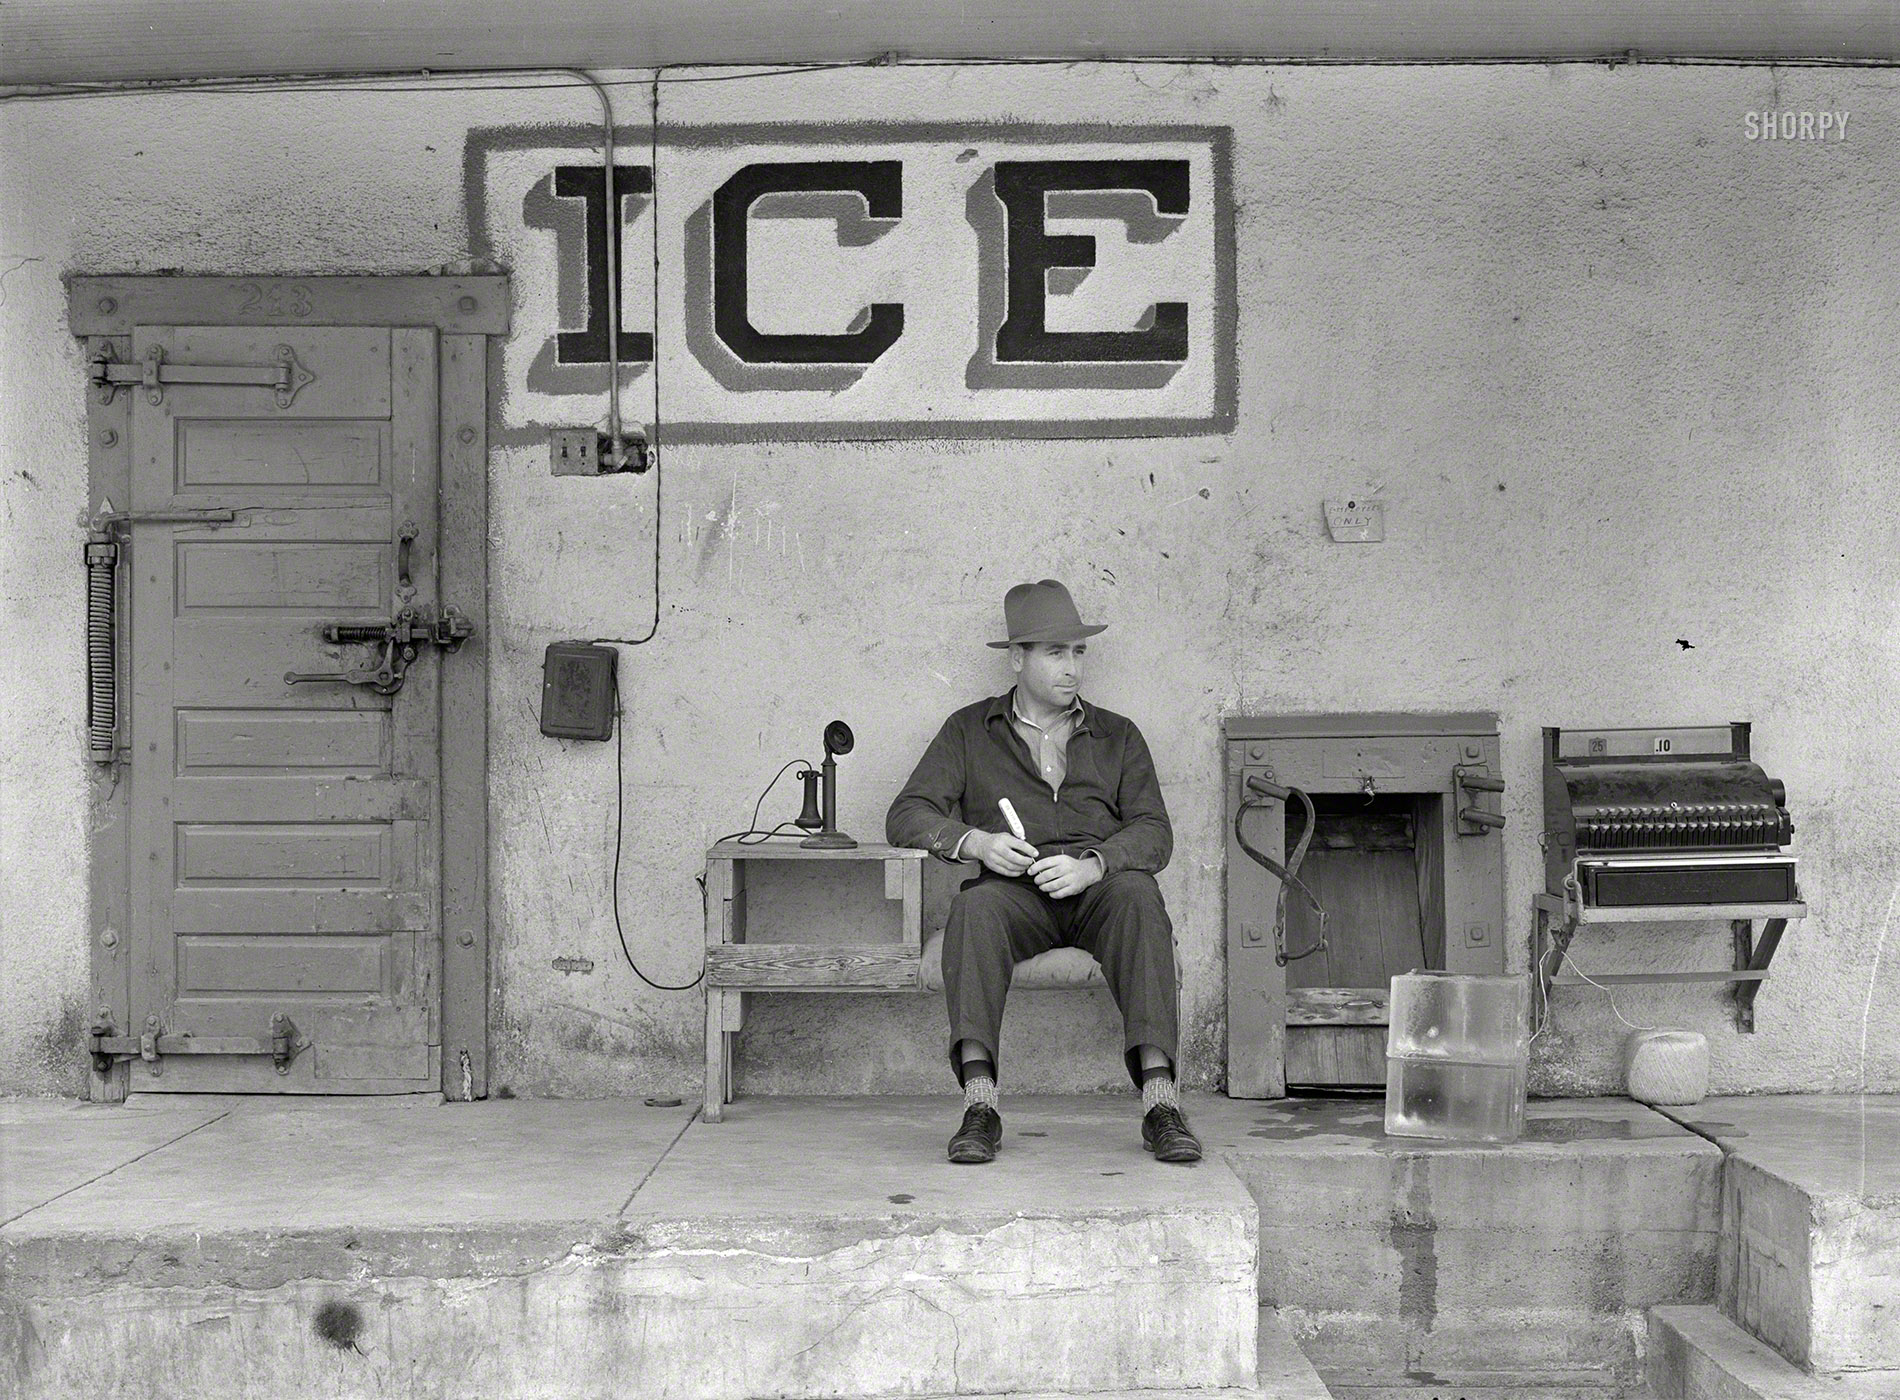 February 1939. "Ice for sale. Harlingen, Texas." Pointy pick? Check. Telephone? Yes. Cash register? Yew betcha. Ginormous ball of twine? Natch. Big block of you-know-what? Right here. Snazzy socks to seal the deal? Done and done. Looks like we are in the ice business! Photo by Russell Lee. View full size.